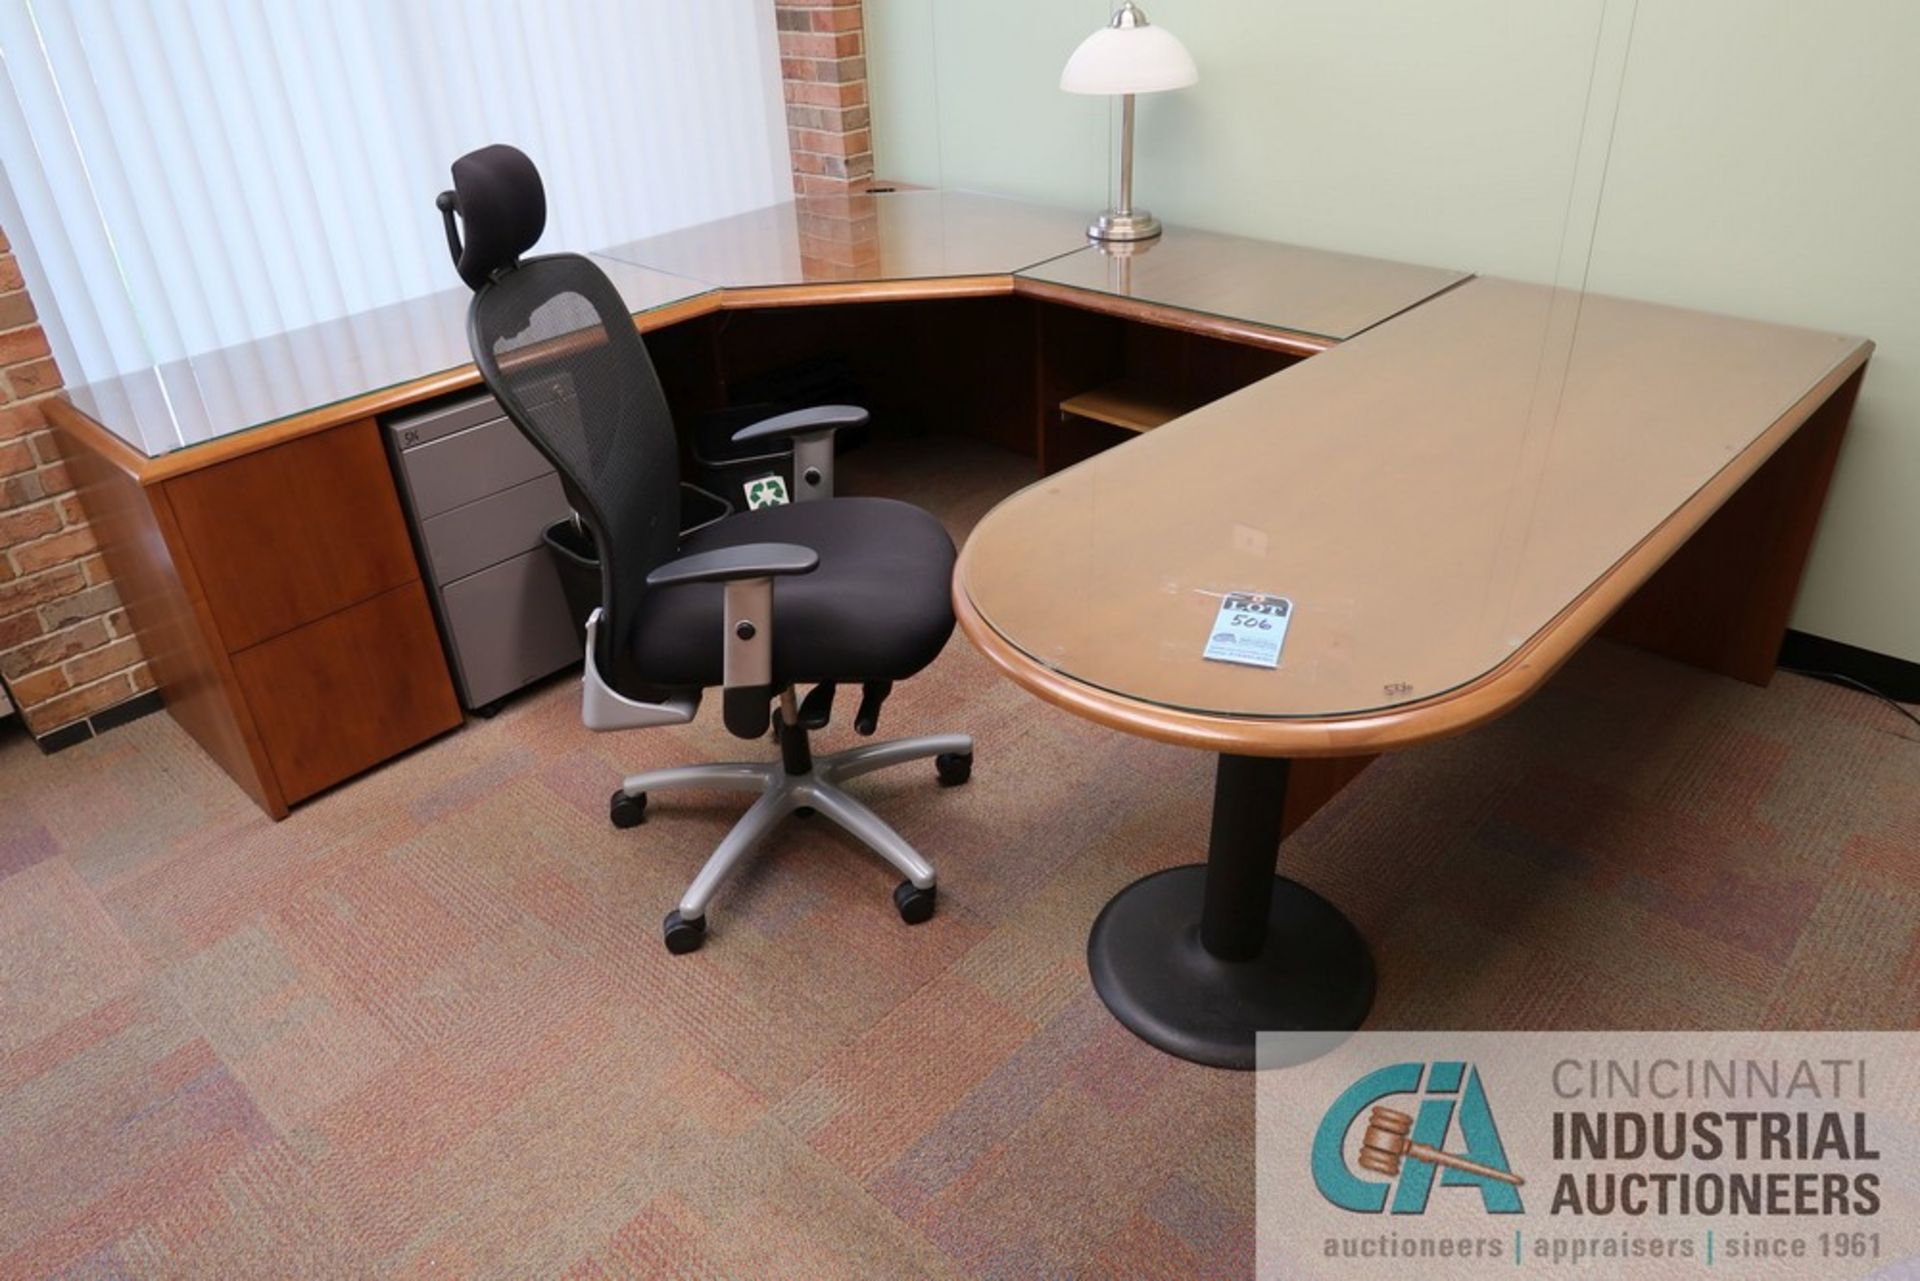 (LOT) CONTENTS OF OFFICE INCLUDES U-SHAPED DESK WITH (2) 2-DRAWER CABINETS AND (3) CHAIRS